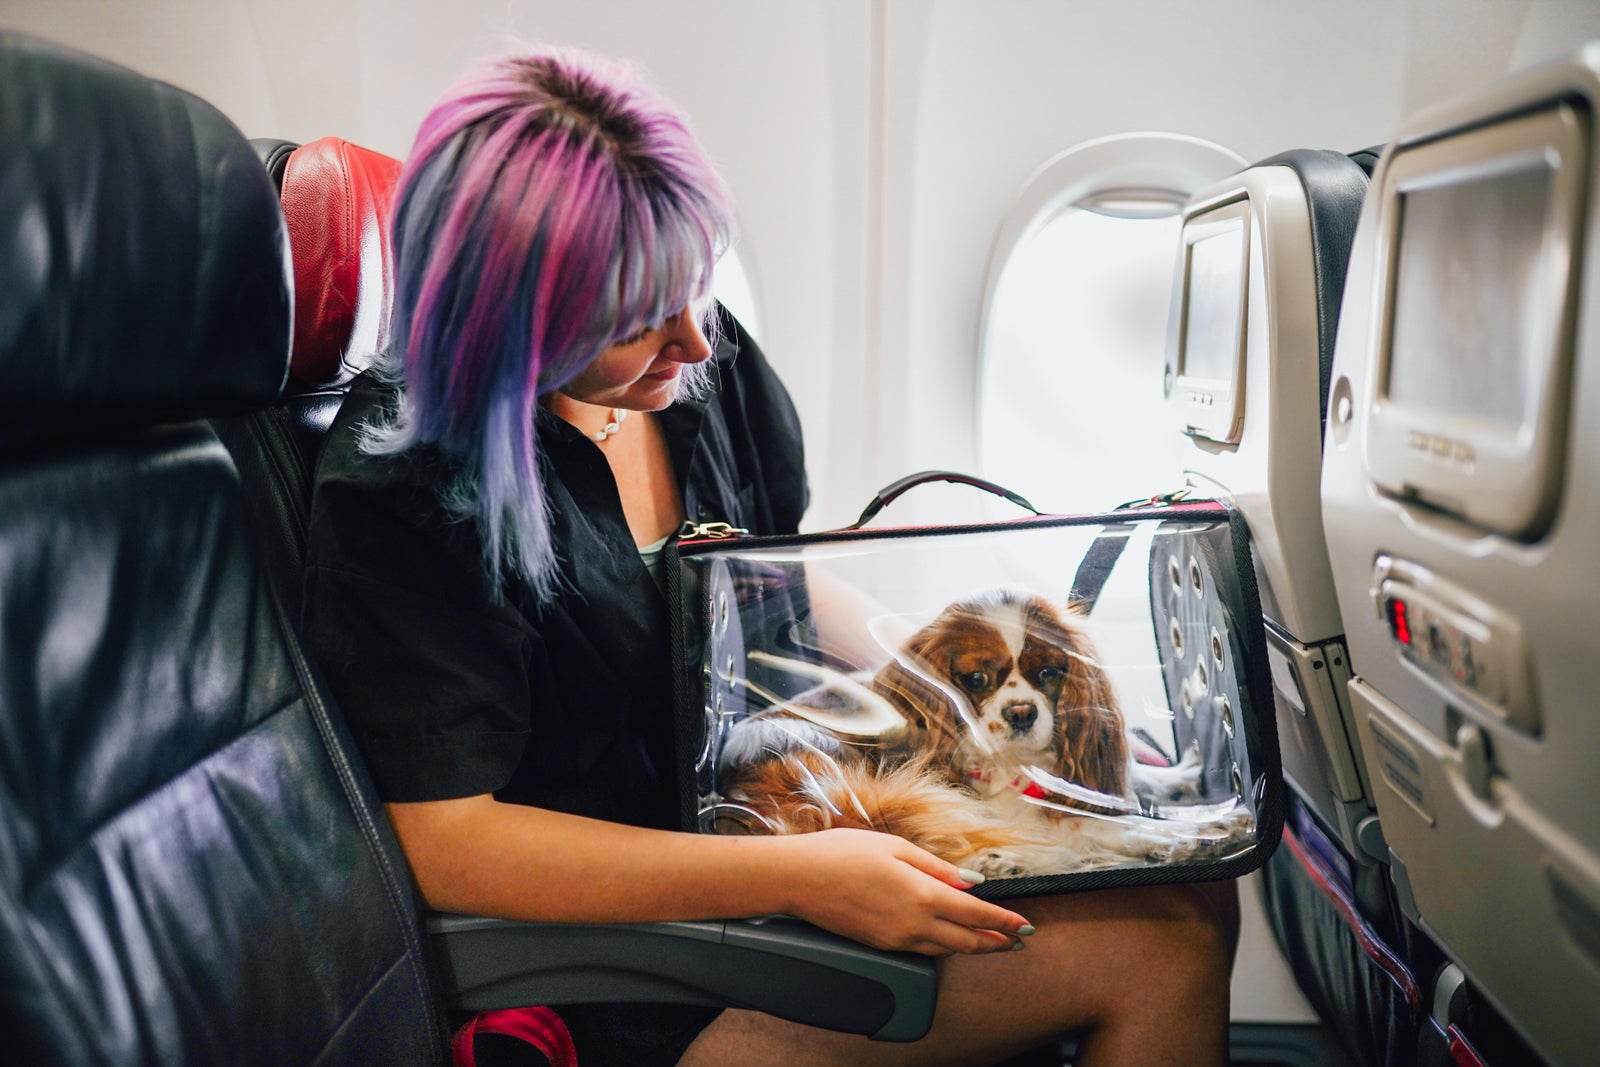 American Airlines' pet policy Here’s how to fly with your cat or dog